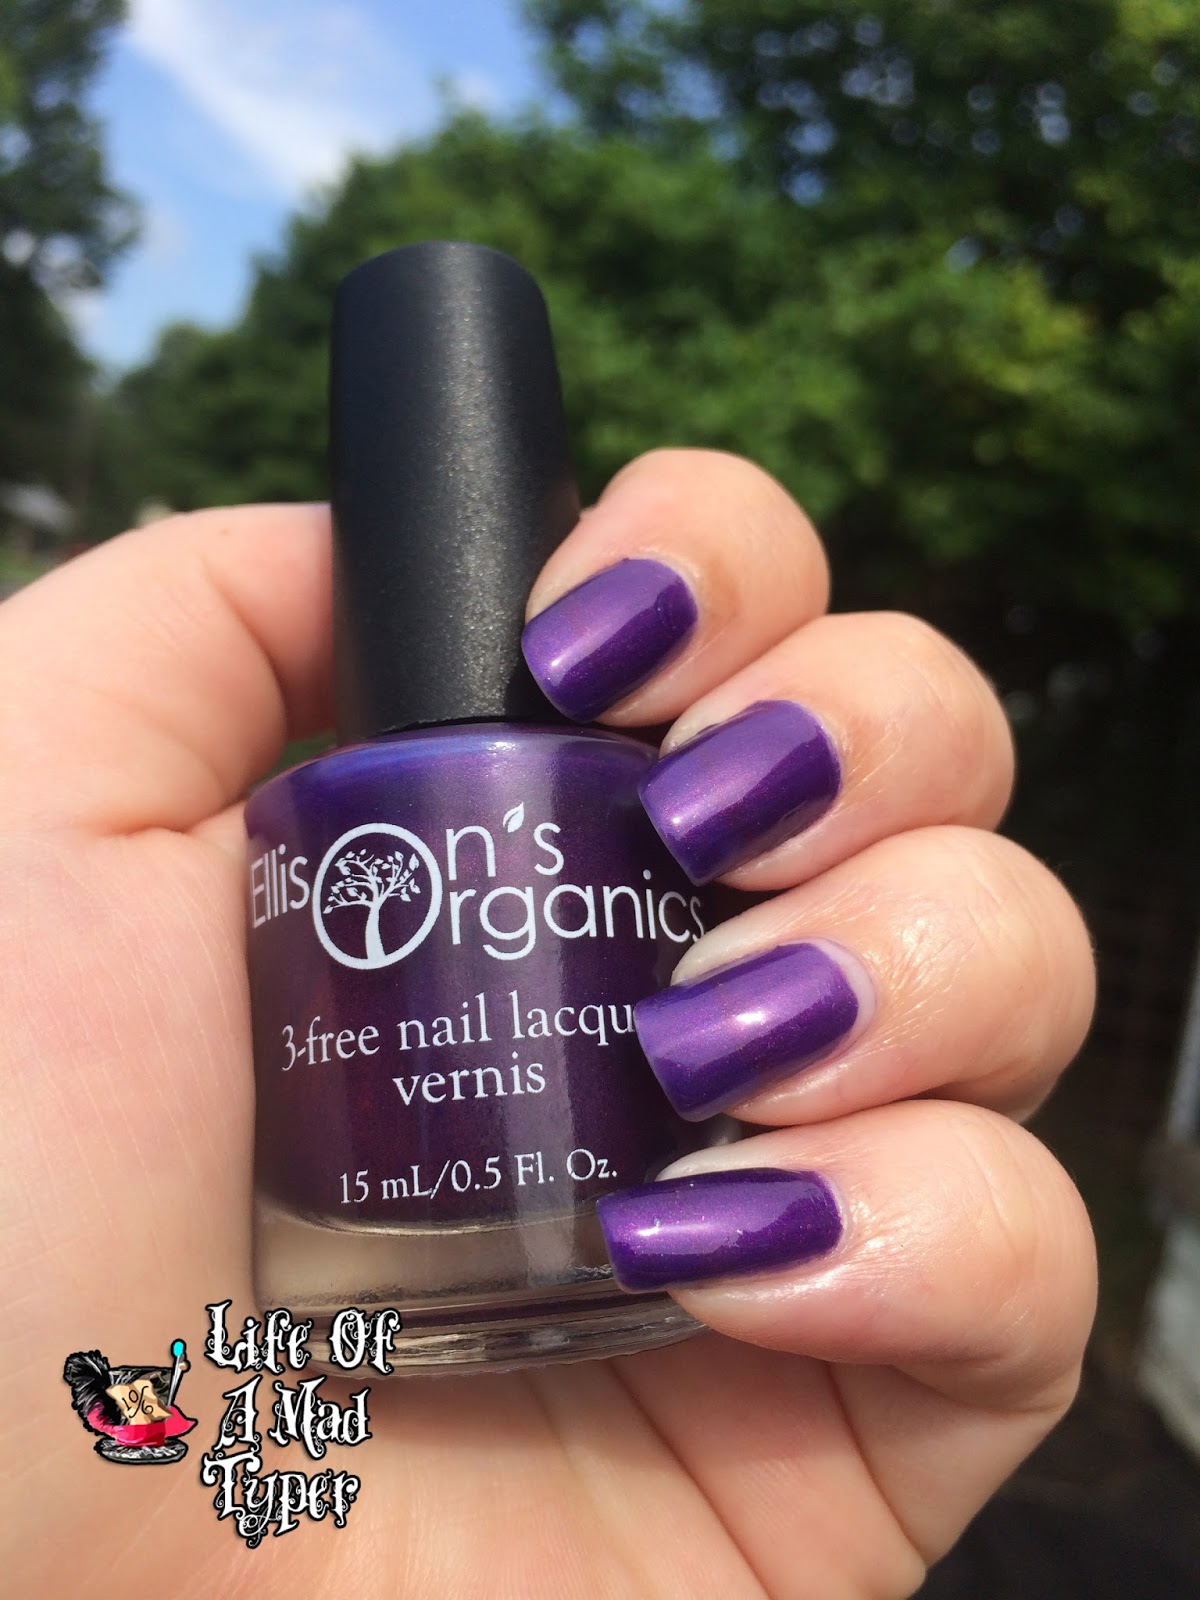 Ellisons Organics Nail polish swatch and review